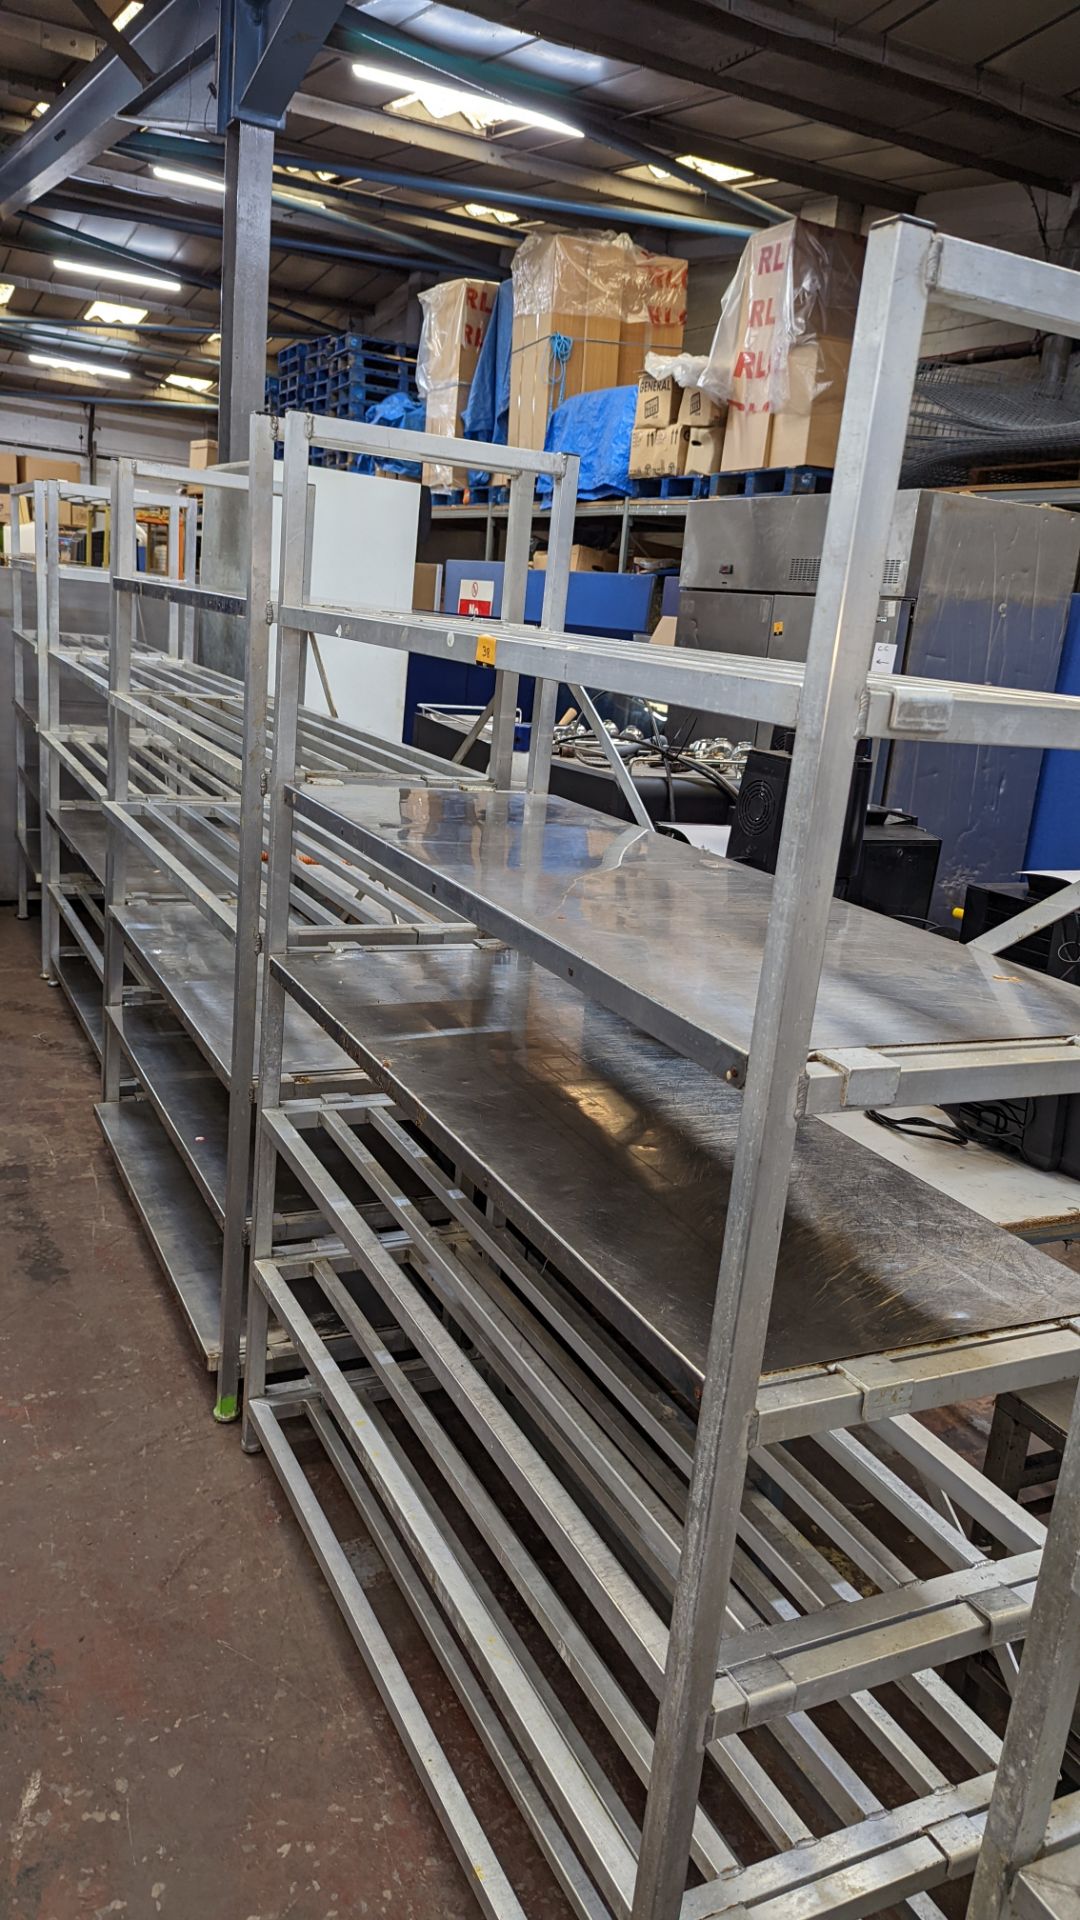 3 freestanding bays of cold store shelving, each being approx. 148cm wide, two bays each having 6 sh